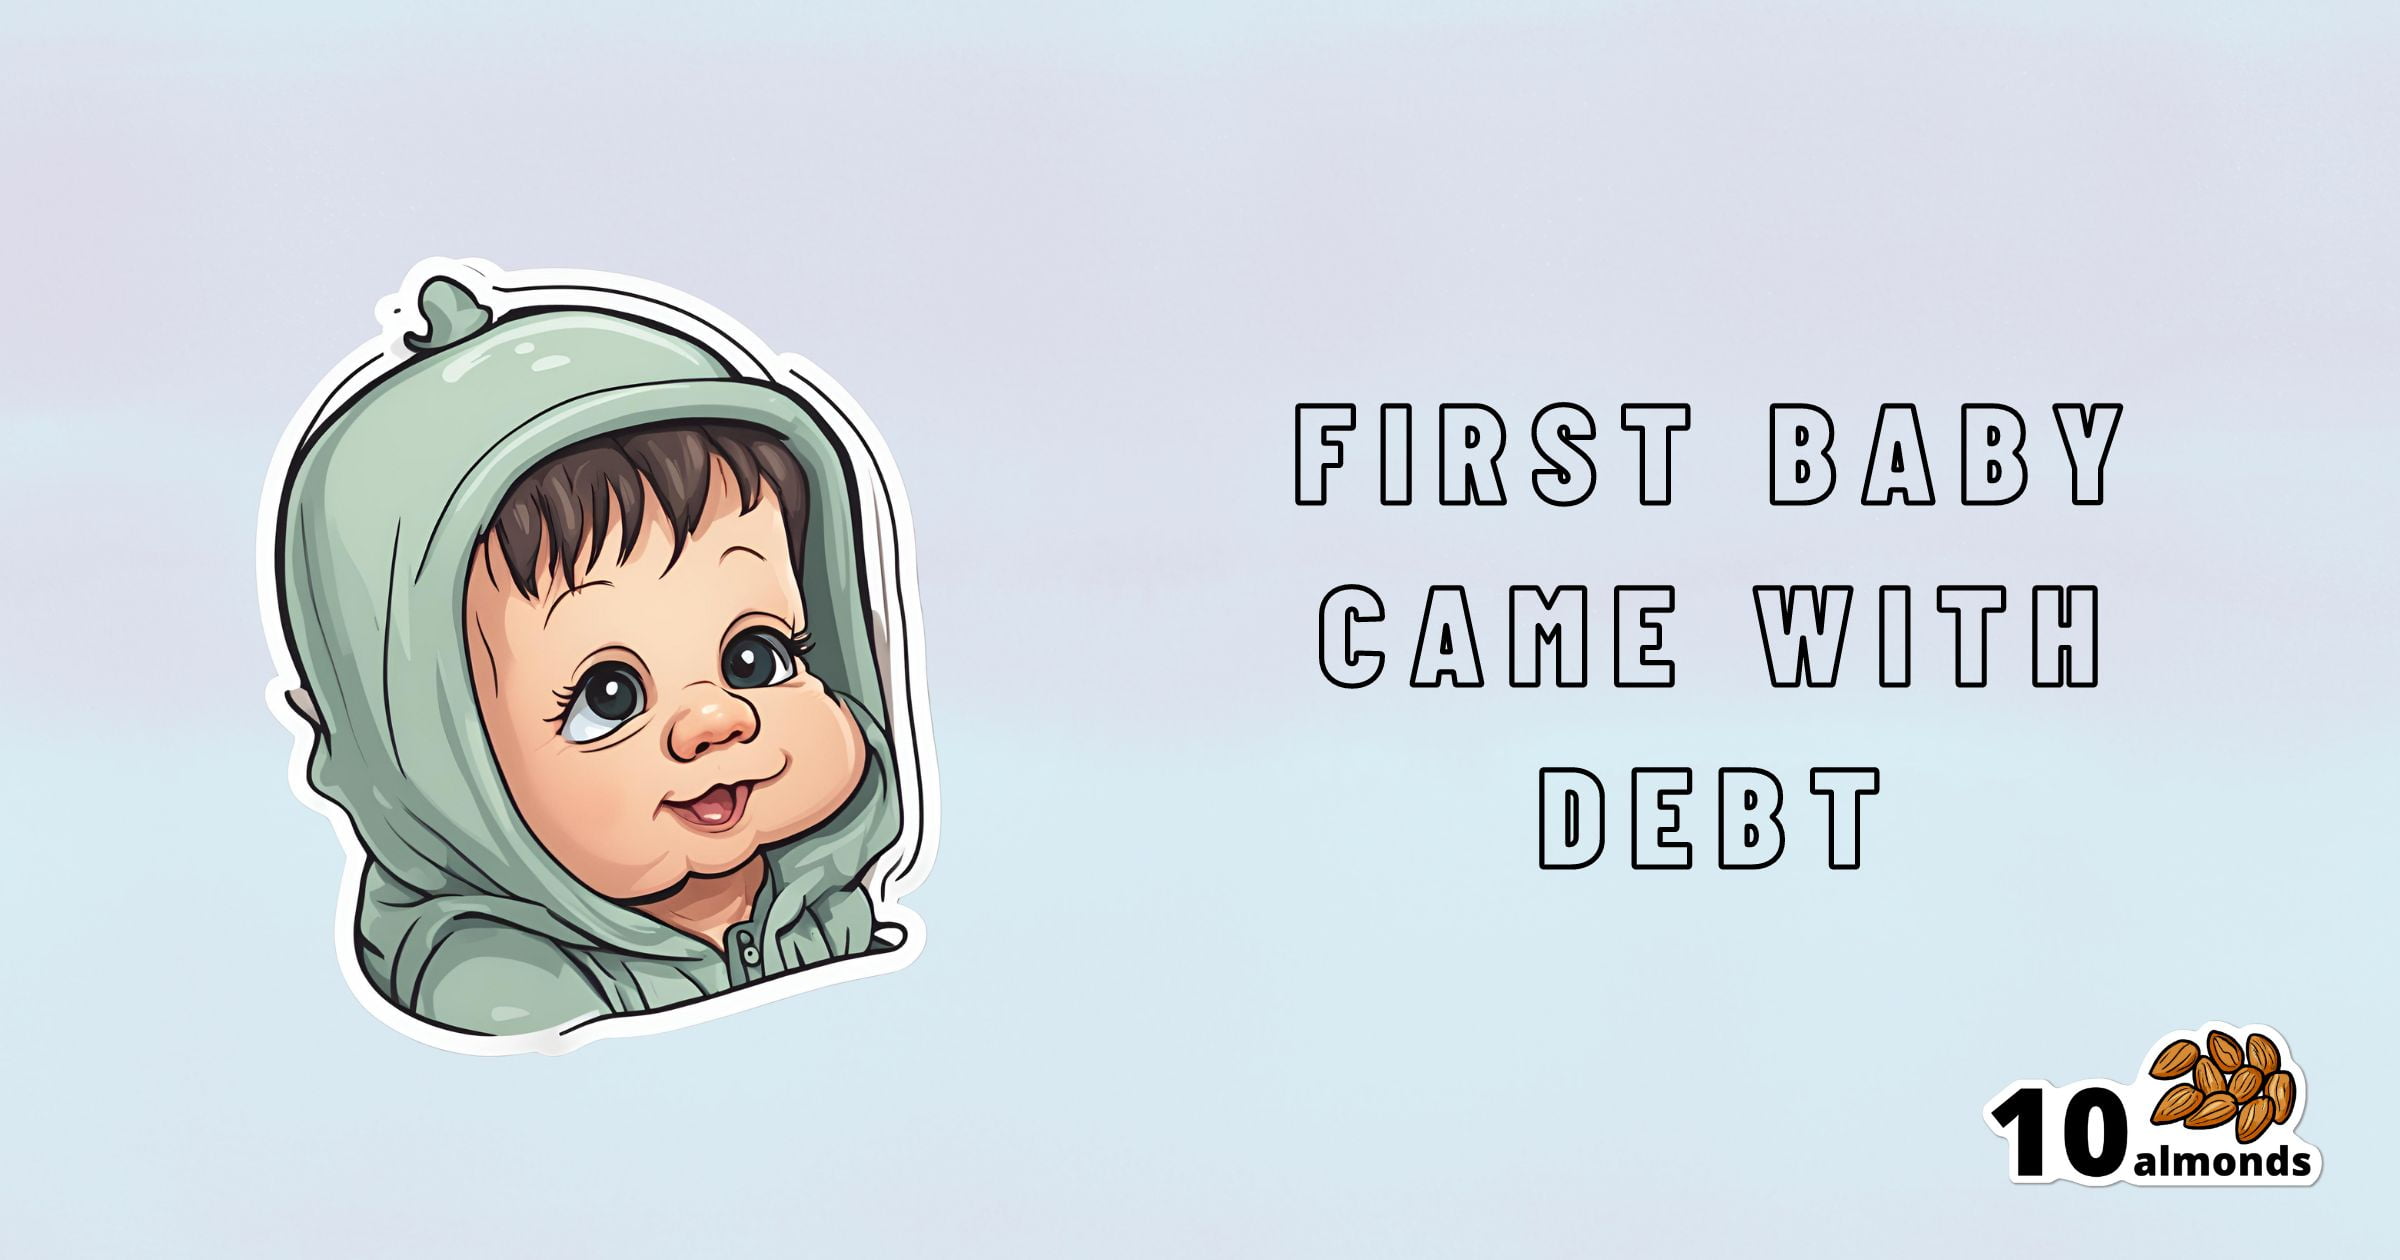 Illustration of a baby smiling while wearing a green hoodie, with the text "First baby came with debt" to the right of the illustration. At the bottom-right corner, there is a small pile of almonds and the text "10 almonds." Many Illinois parents find themselves facing medical debt after their baby's arrival.